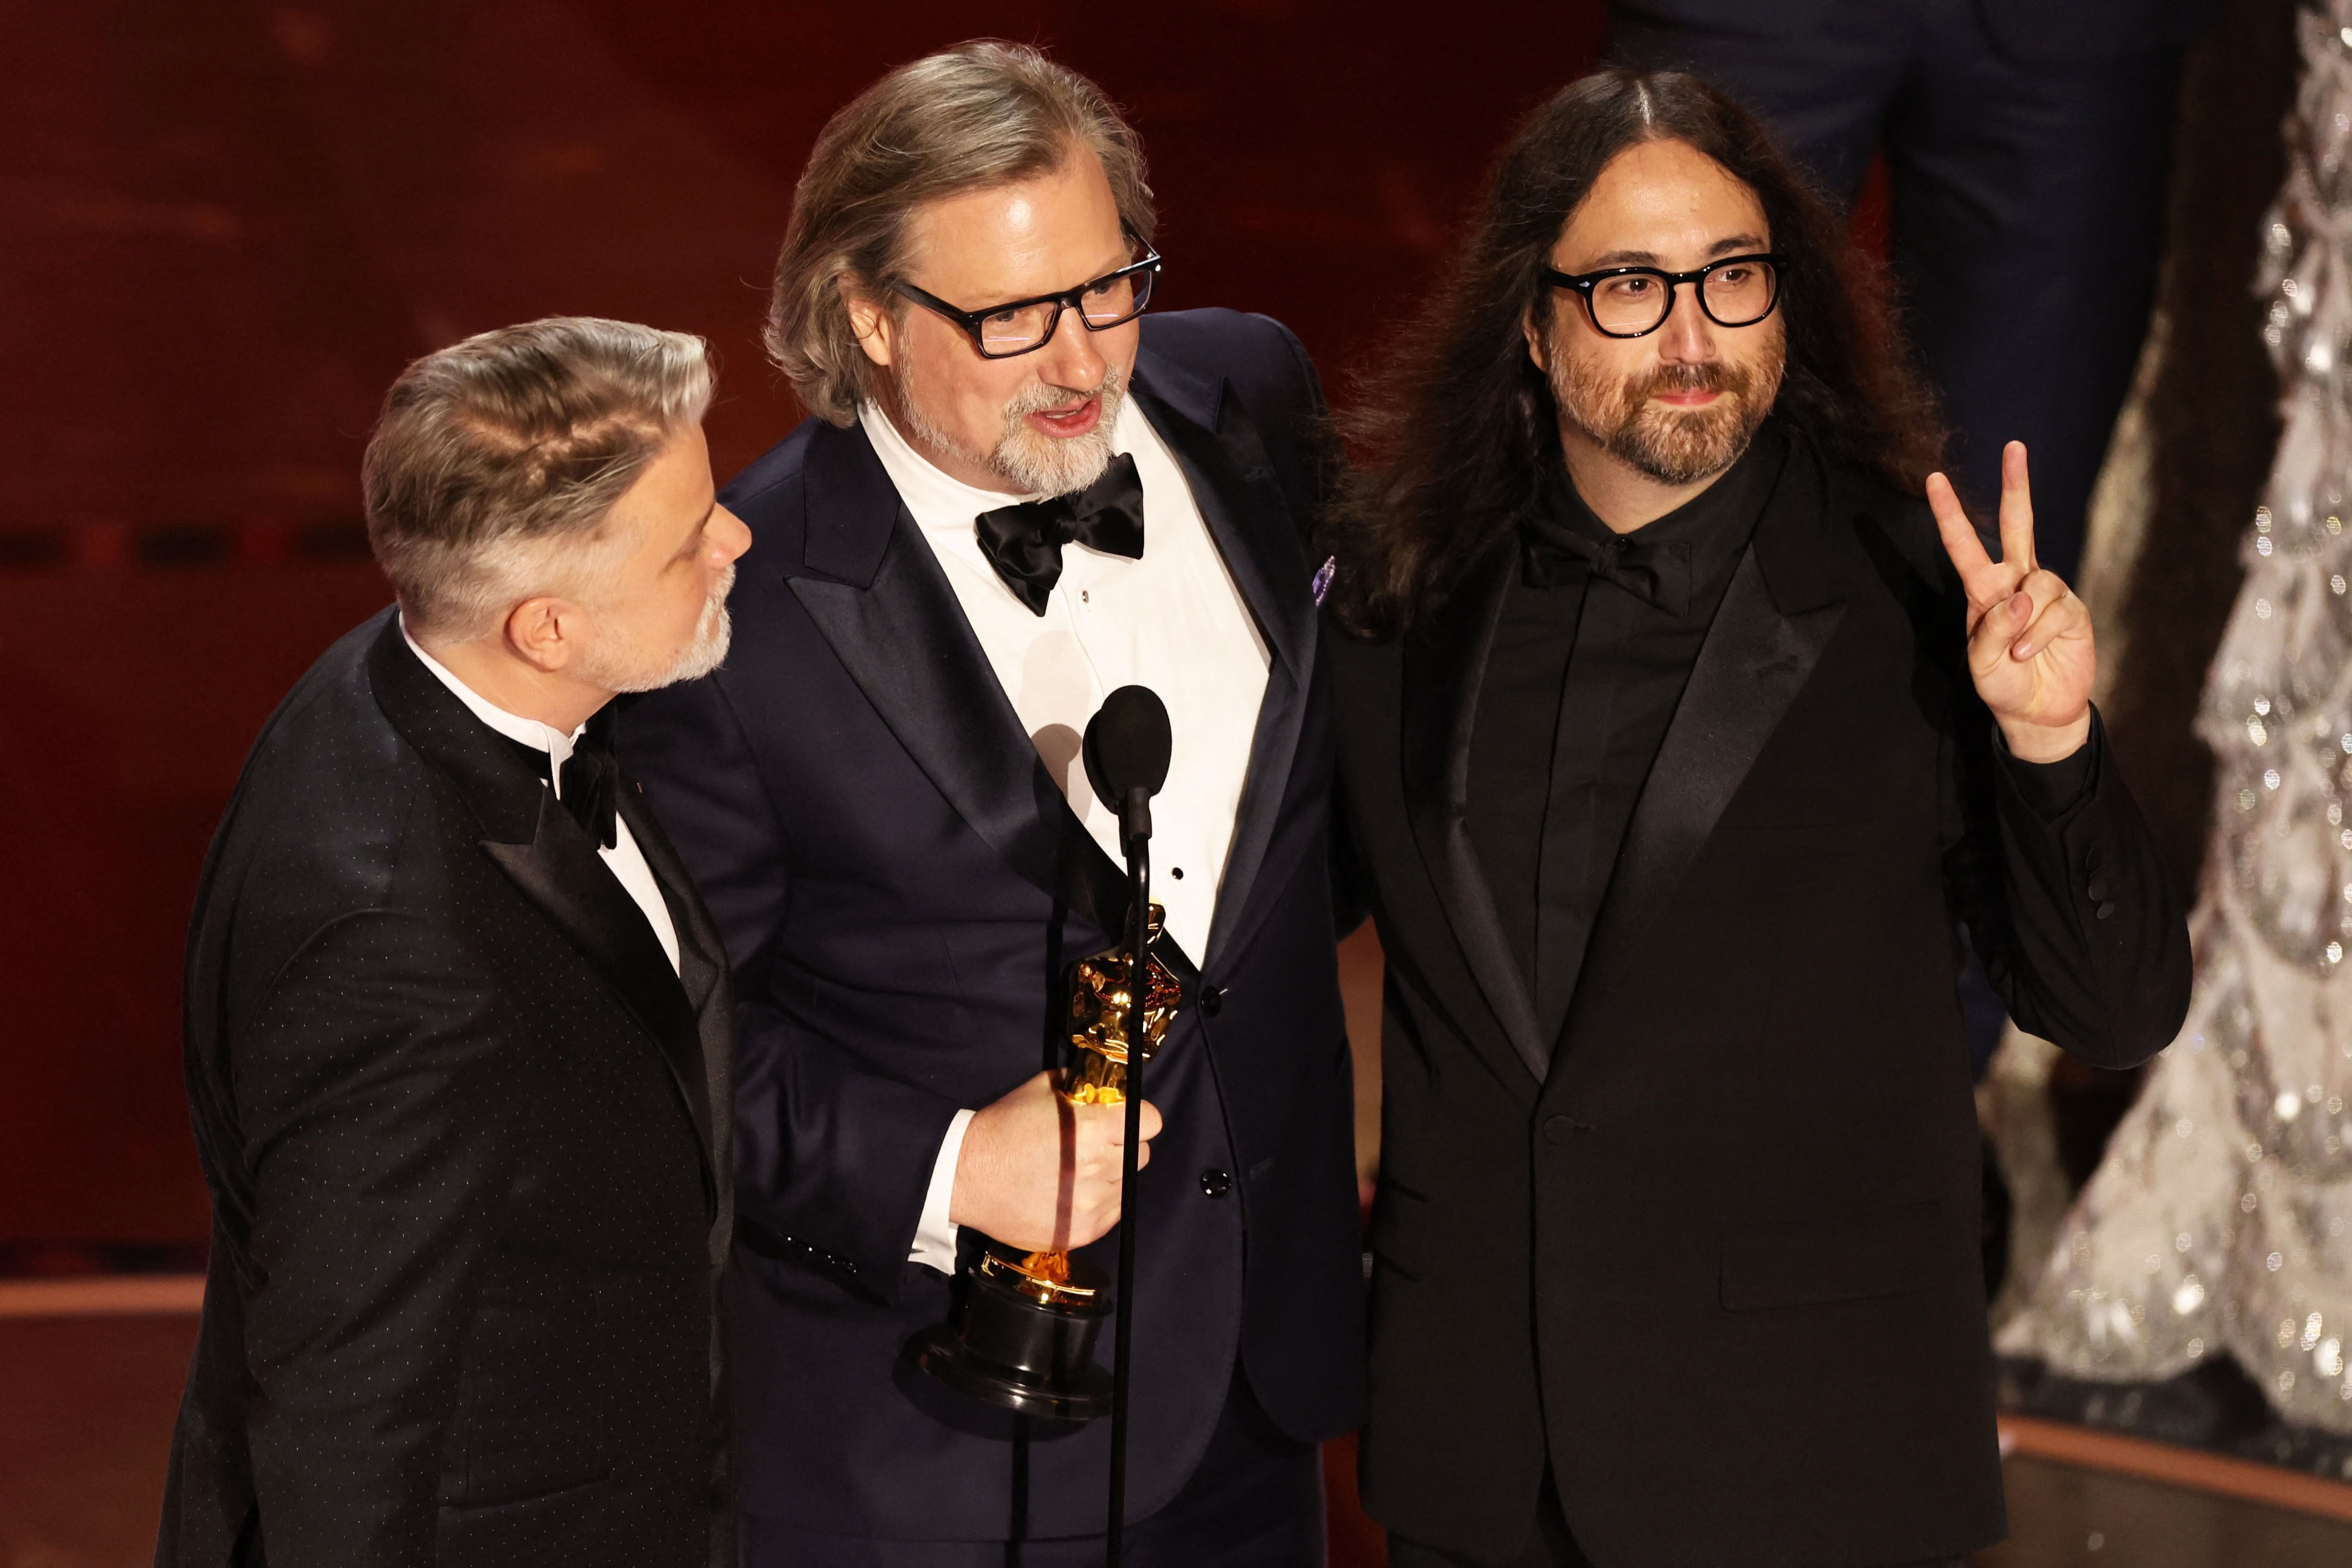 Dave Mullins and Brad Booker win the Oscar for Best Animated Short Film for "War Is Over! Inspired by the Music of John & Yoko" during the Oscars show at the 96th Academy Awards in Hollywood, Los Angeles, California, U.S., March 10, 2024. REUTERS/Mike Blake